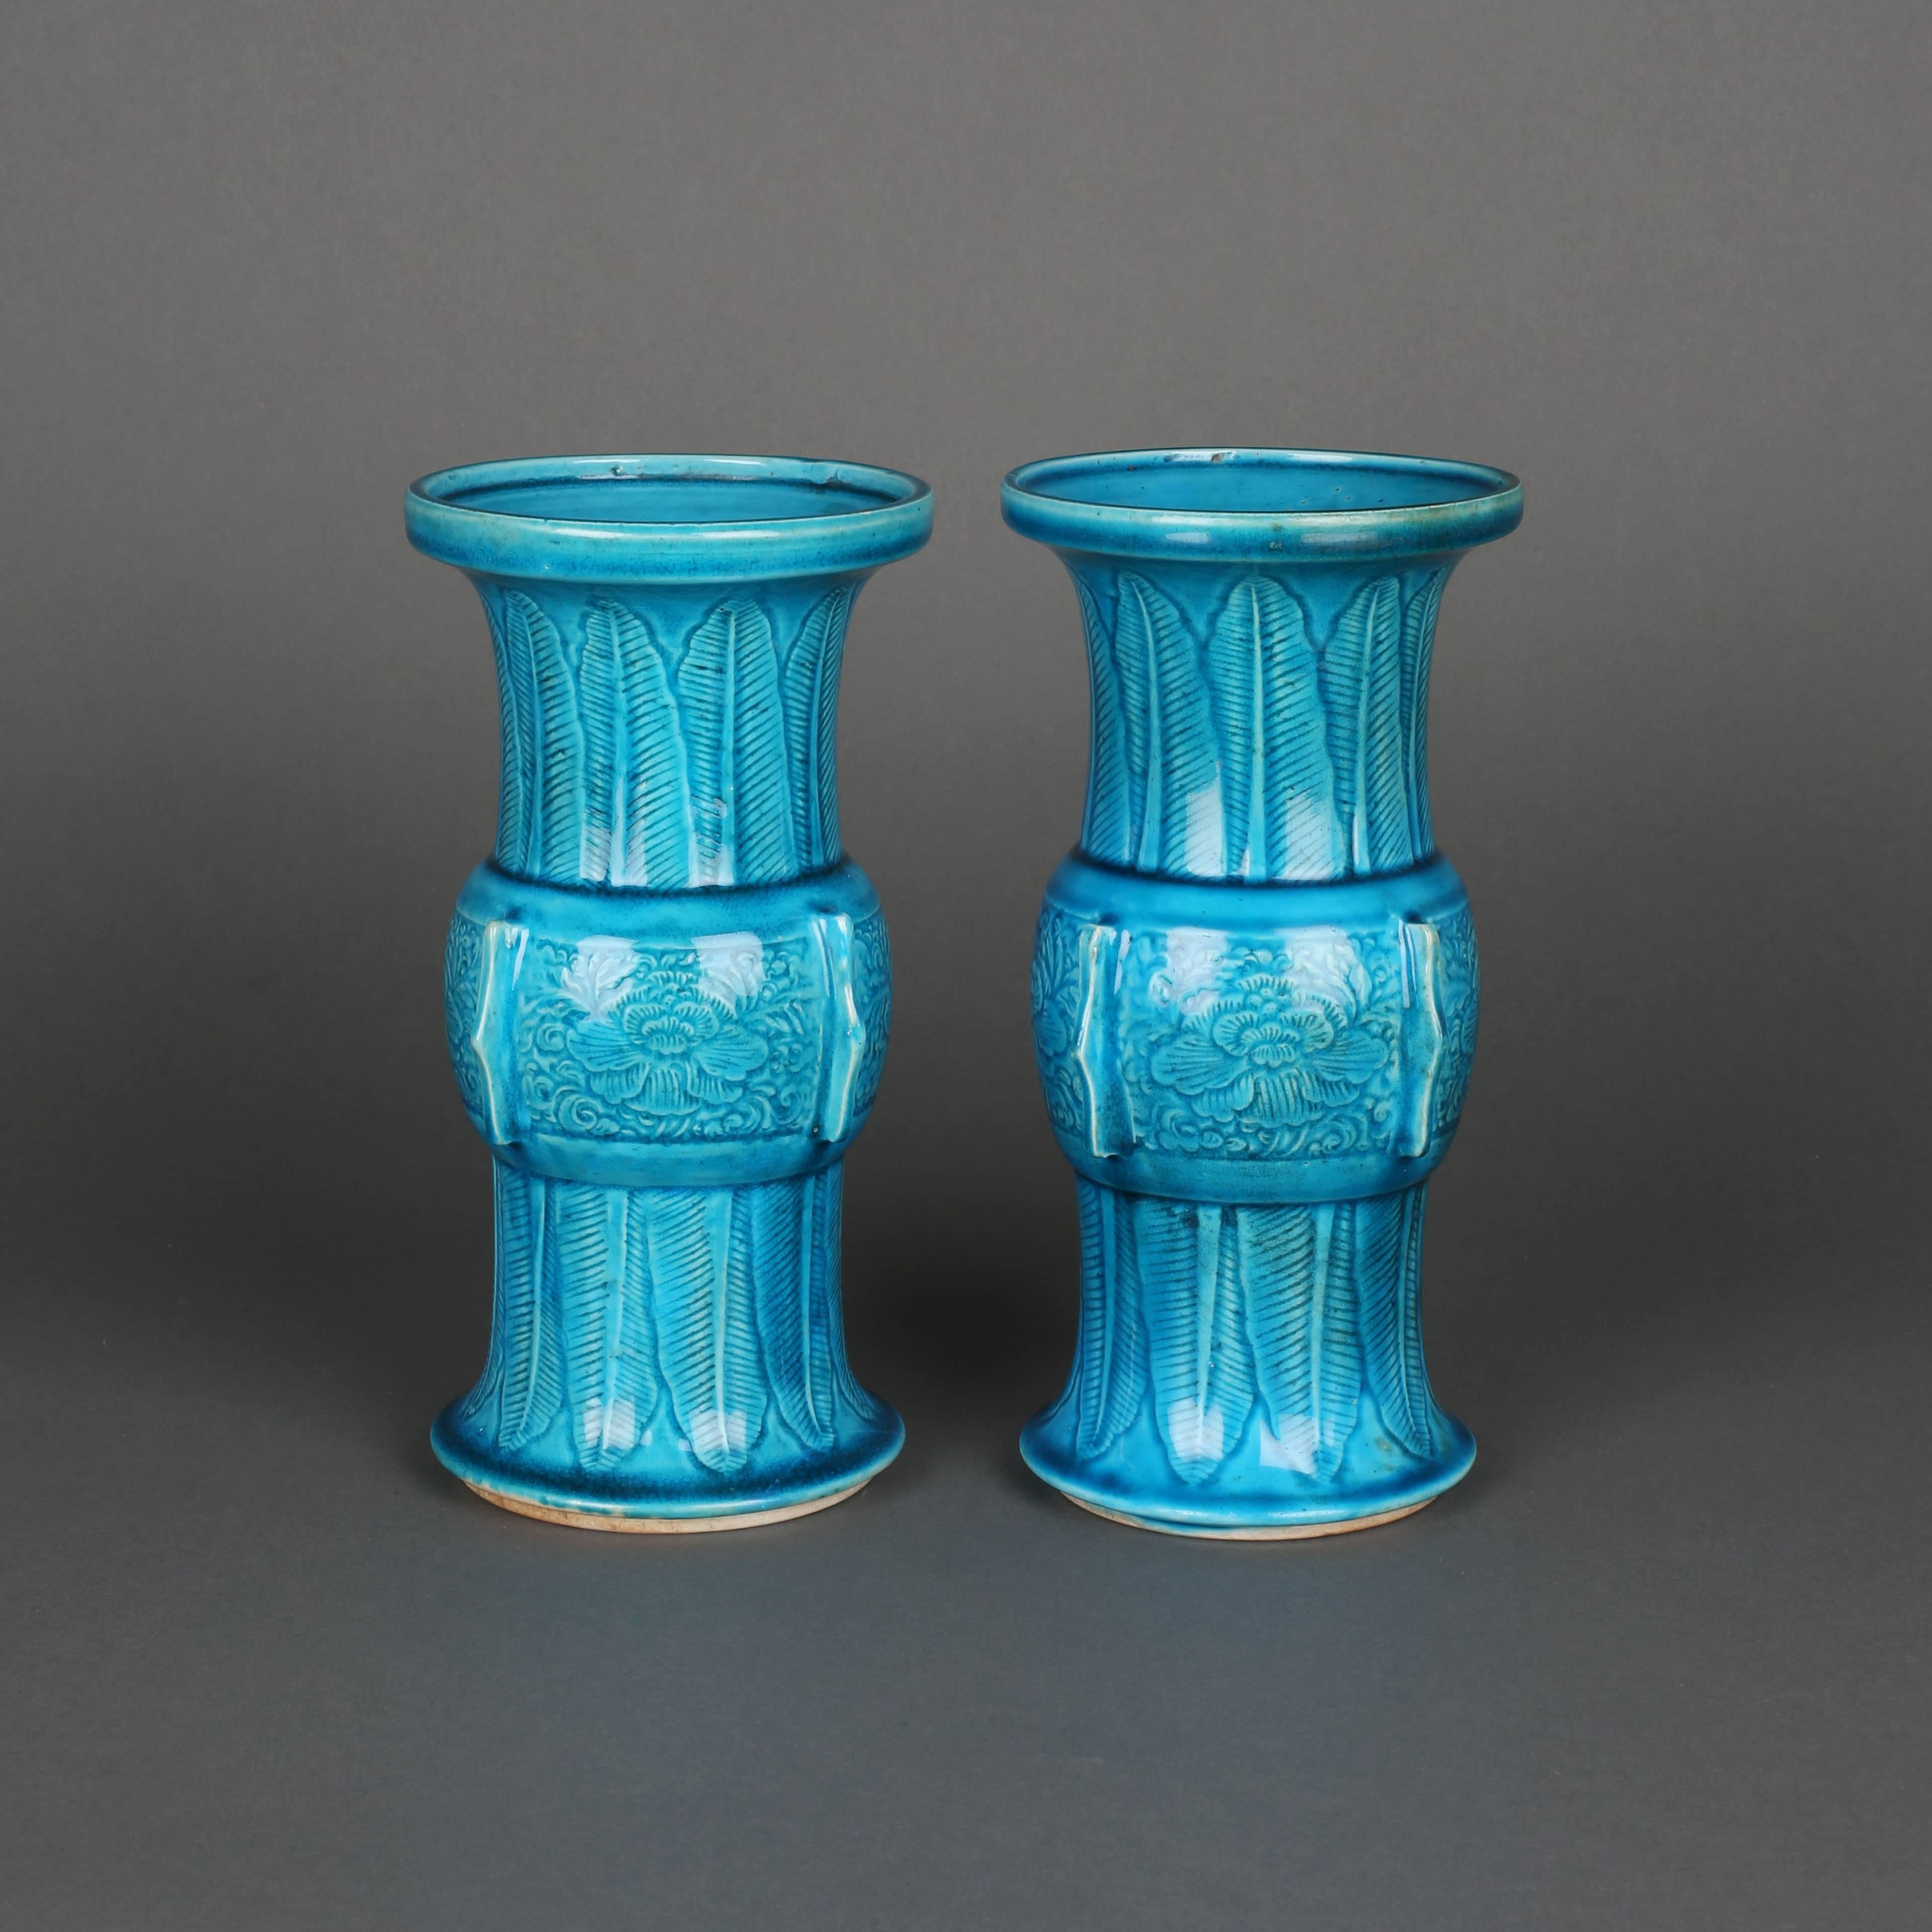 Qing Pair of Chinese Porcelain Turquoise Glazed Vases of Gu Form, 17th Century For Sale